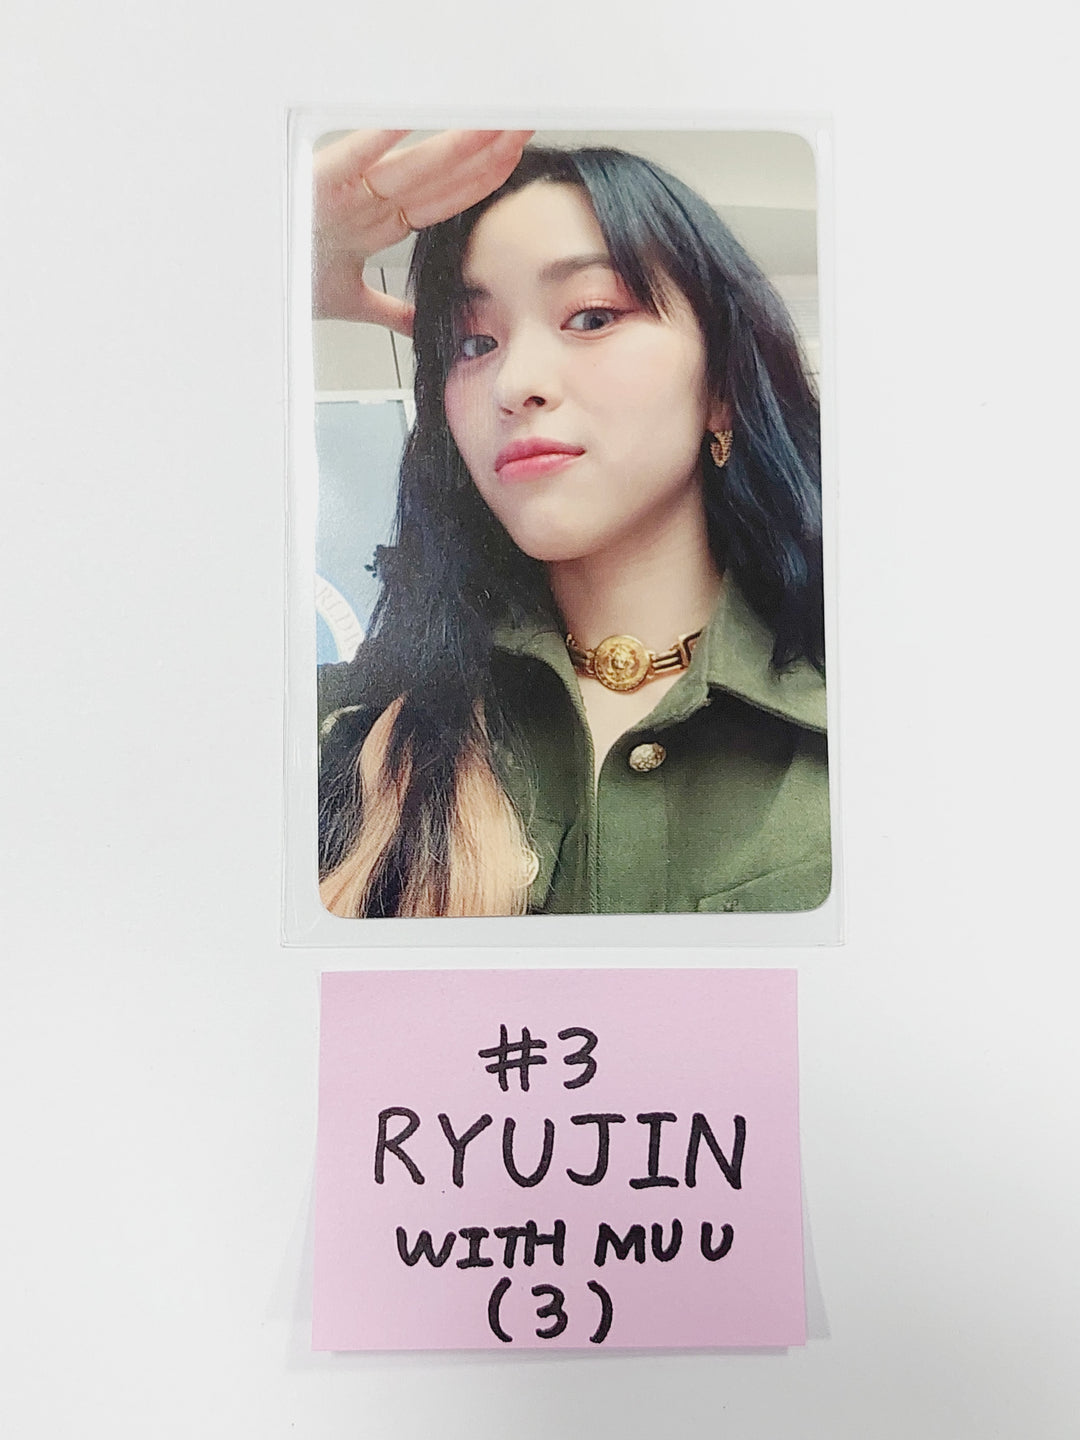 ITZY 'CHECKMATE' - Withmuu FanSign Event PhotoCard